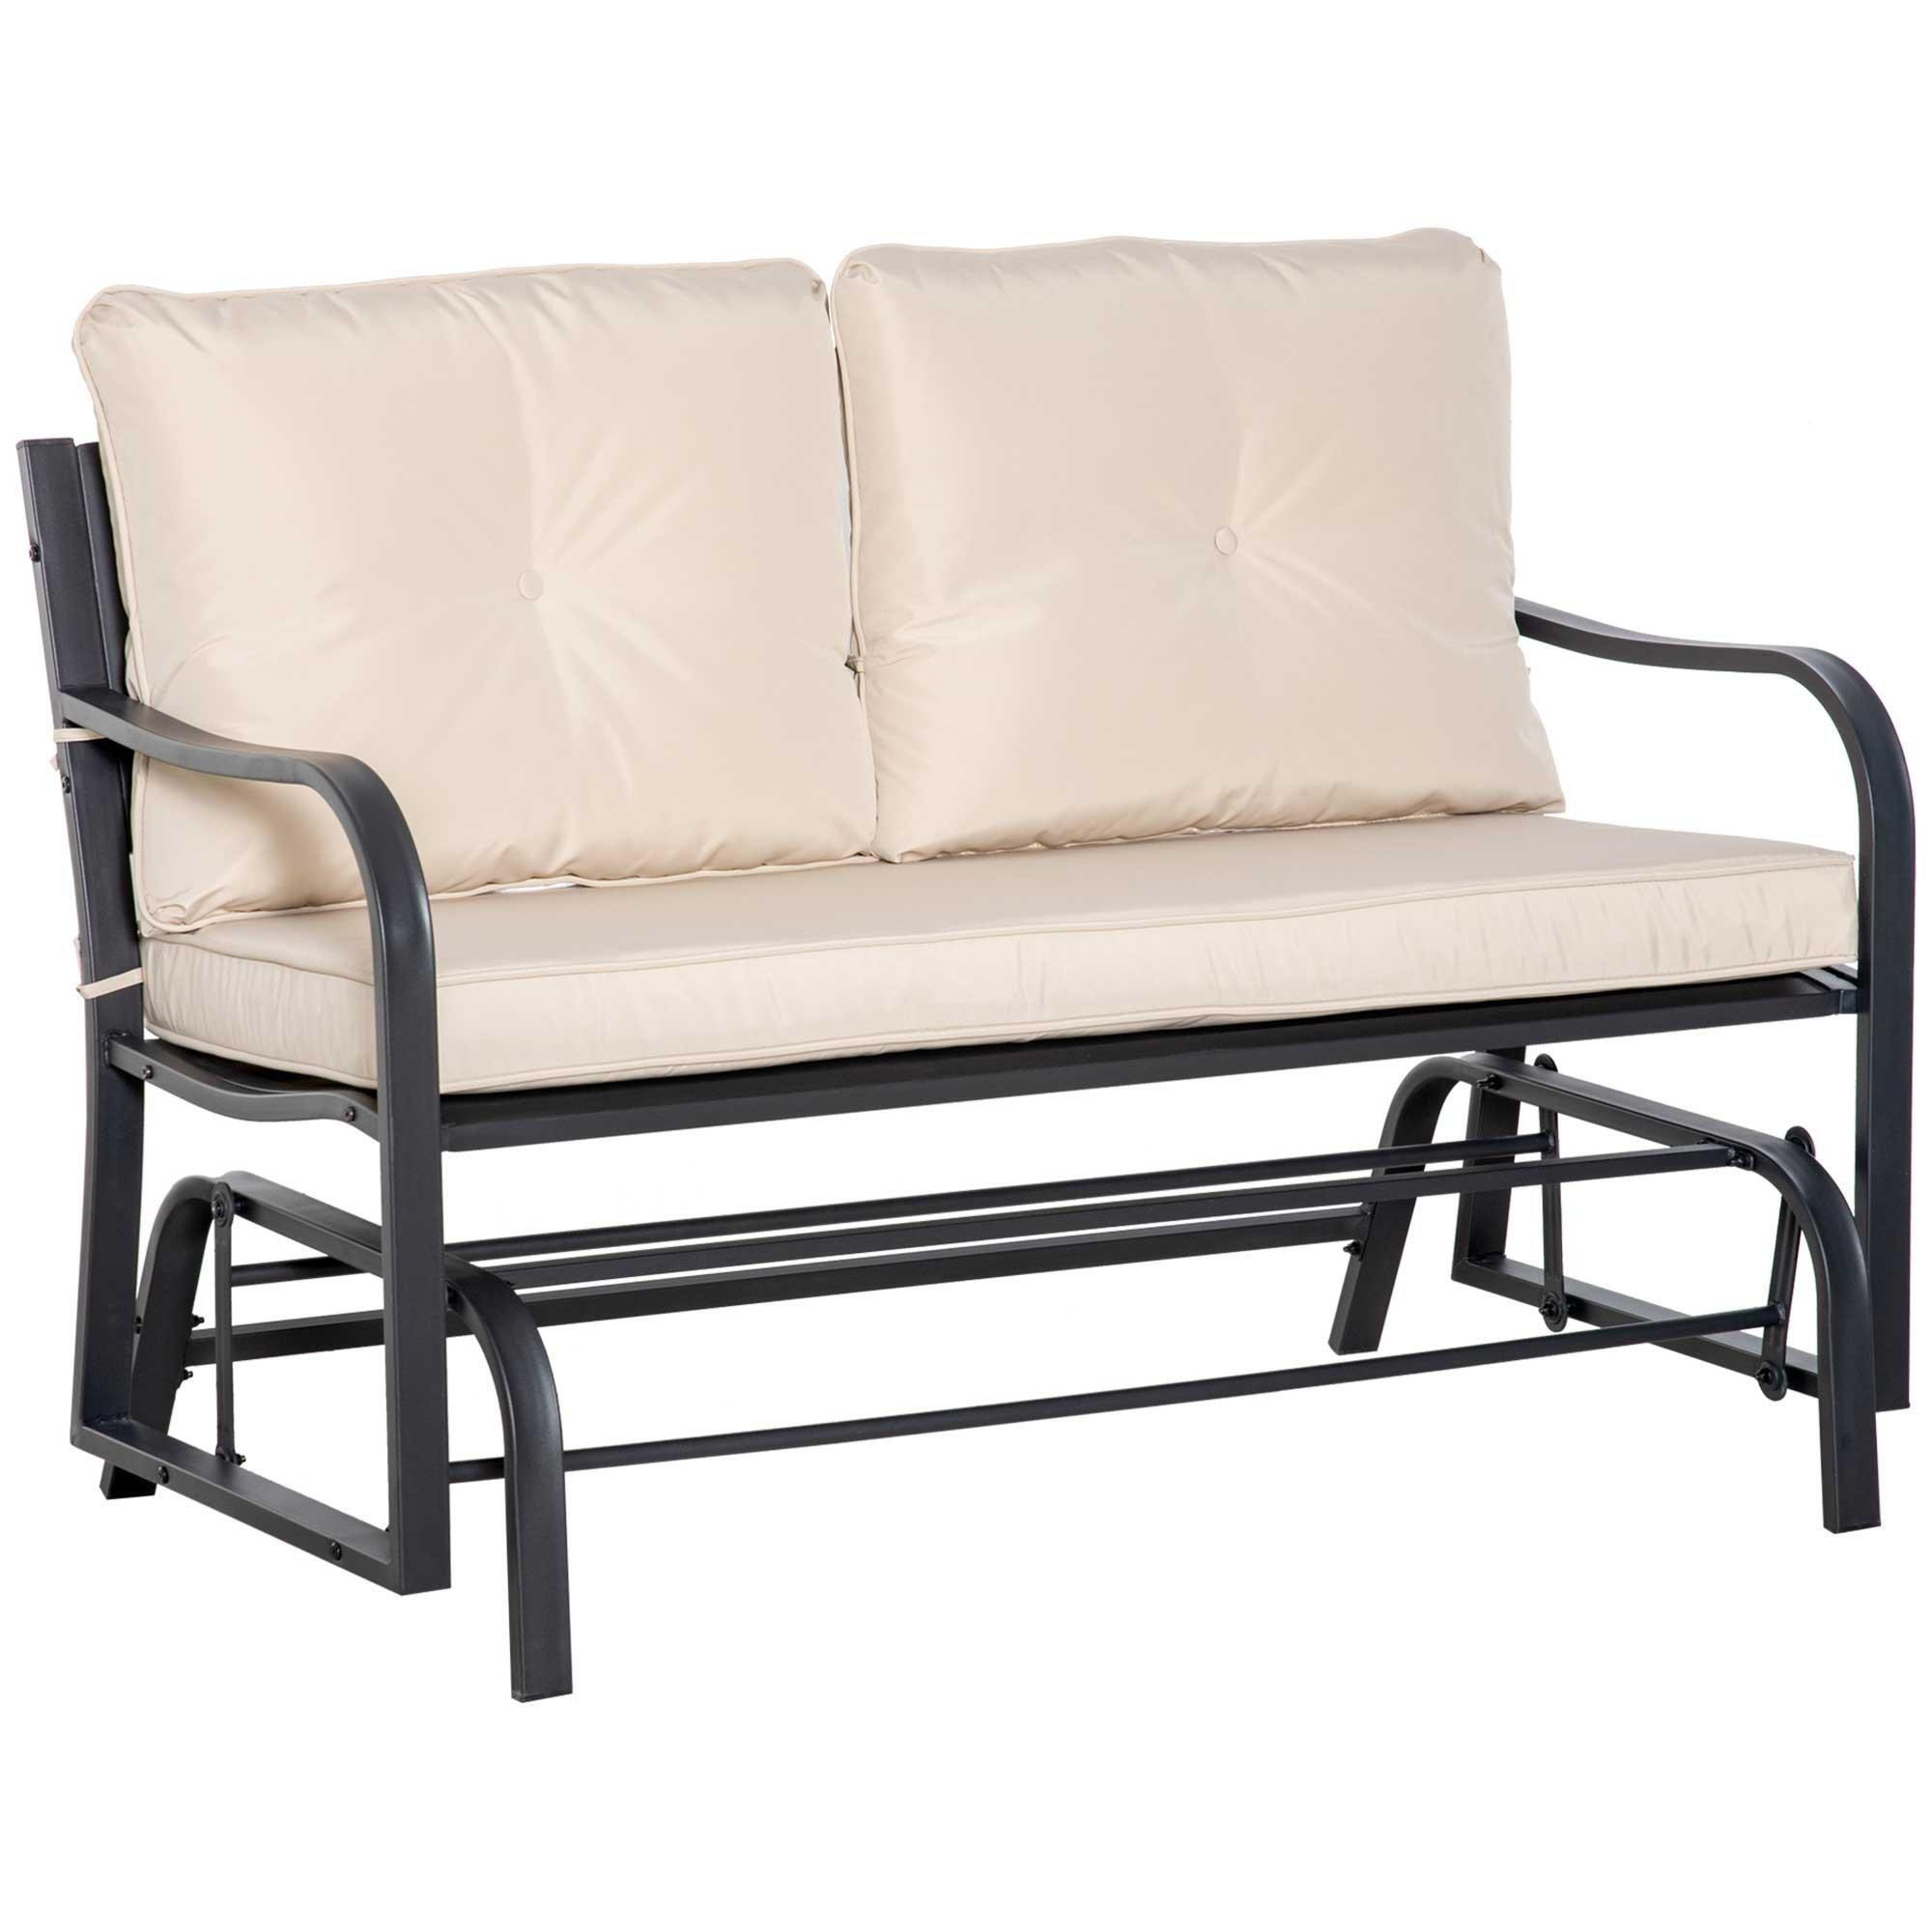 Outdoor Double Rocking Chair Glider Loveseat with Cushion - image 1